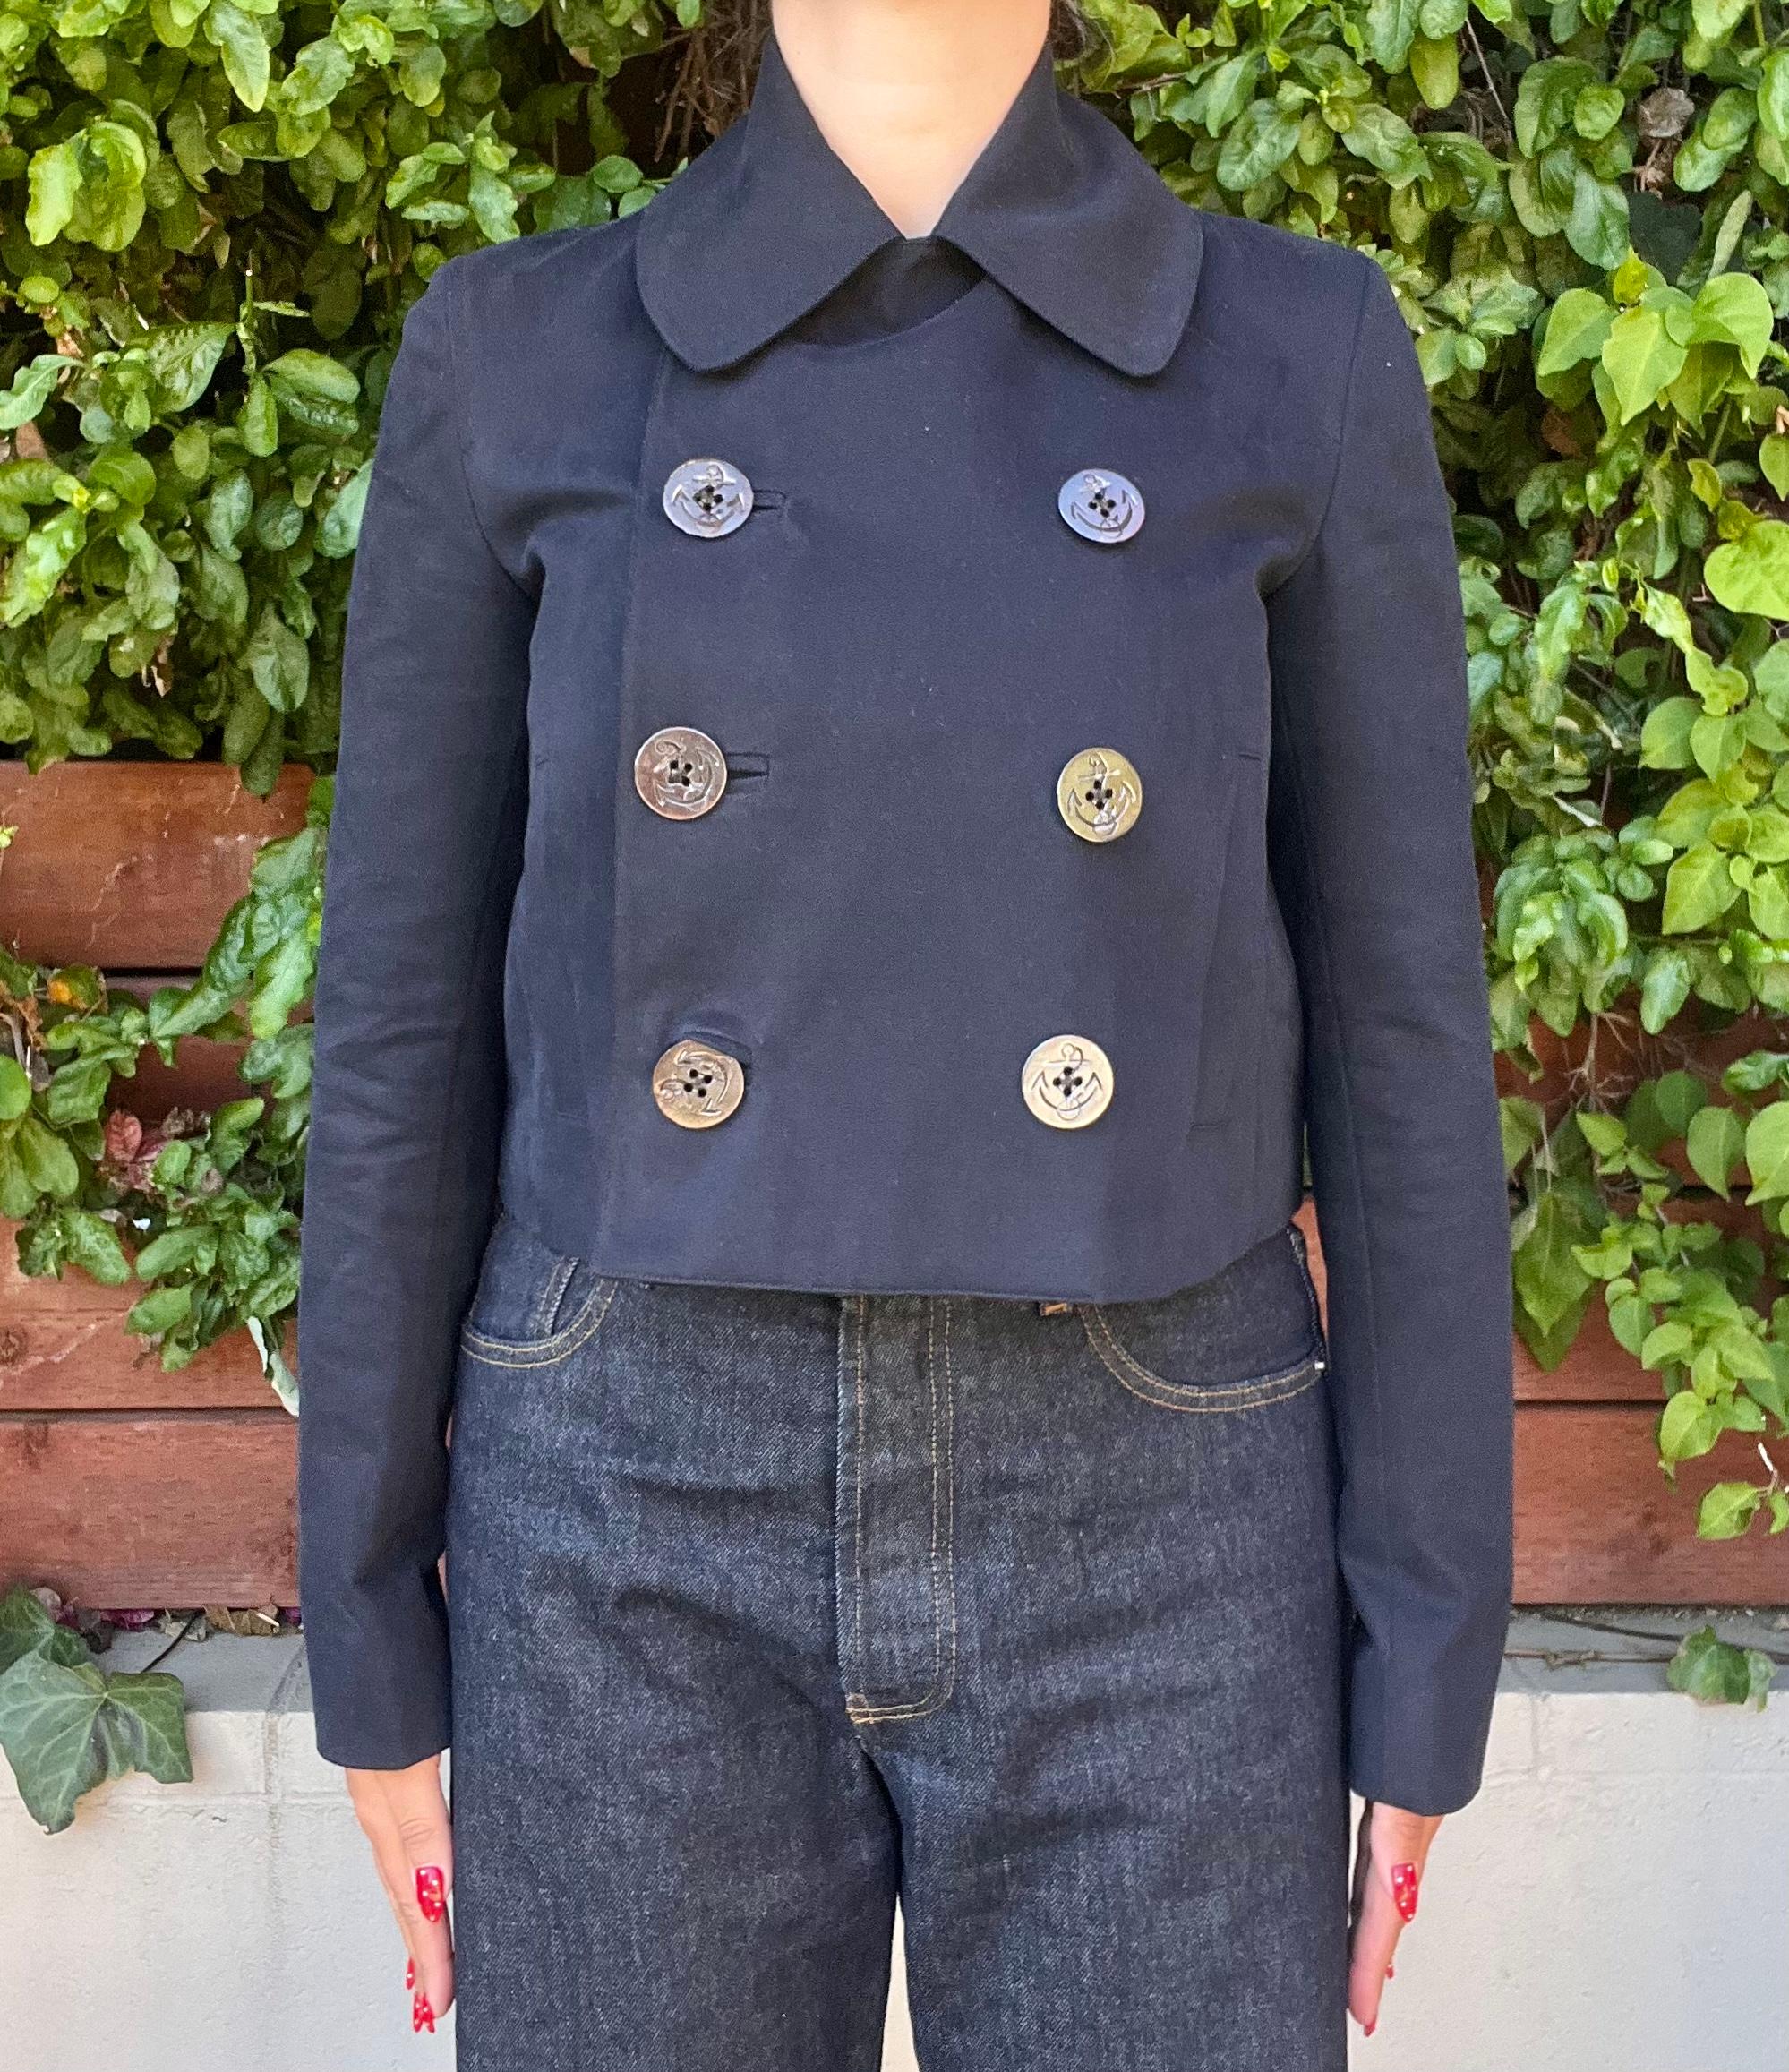 - The jacket features cropped fit
- Pockets on each side
- Six front buttons closure with anchor/ nautical motif 
- Made in Italy
- 65% cotton and 35% wool